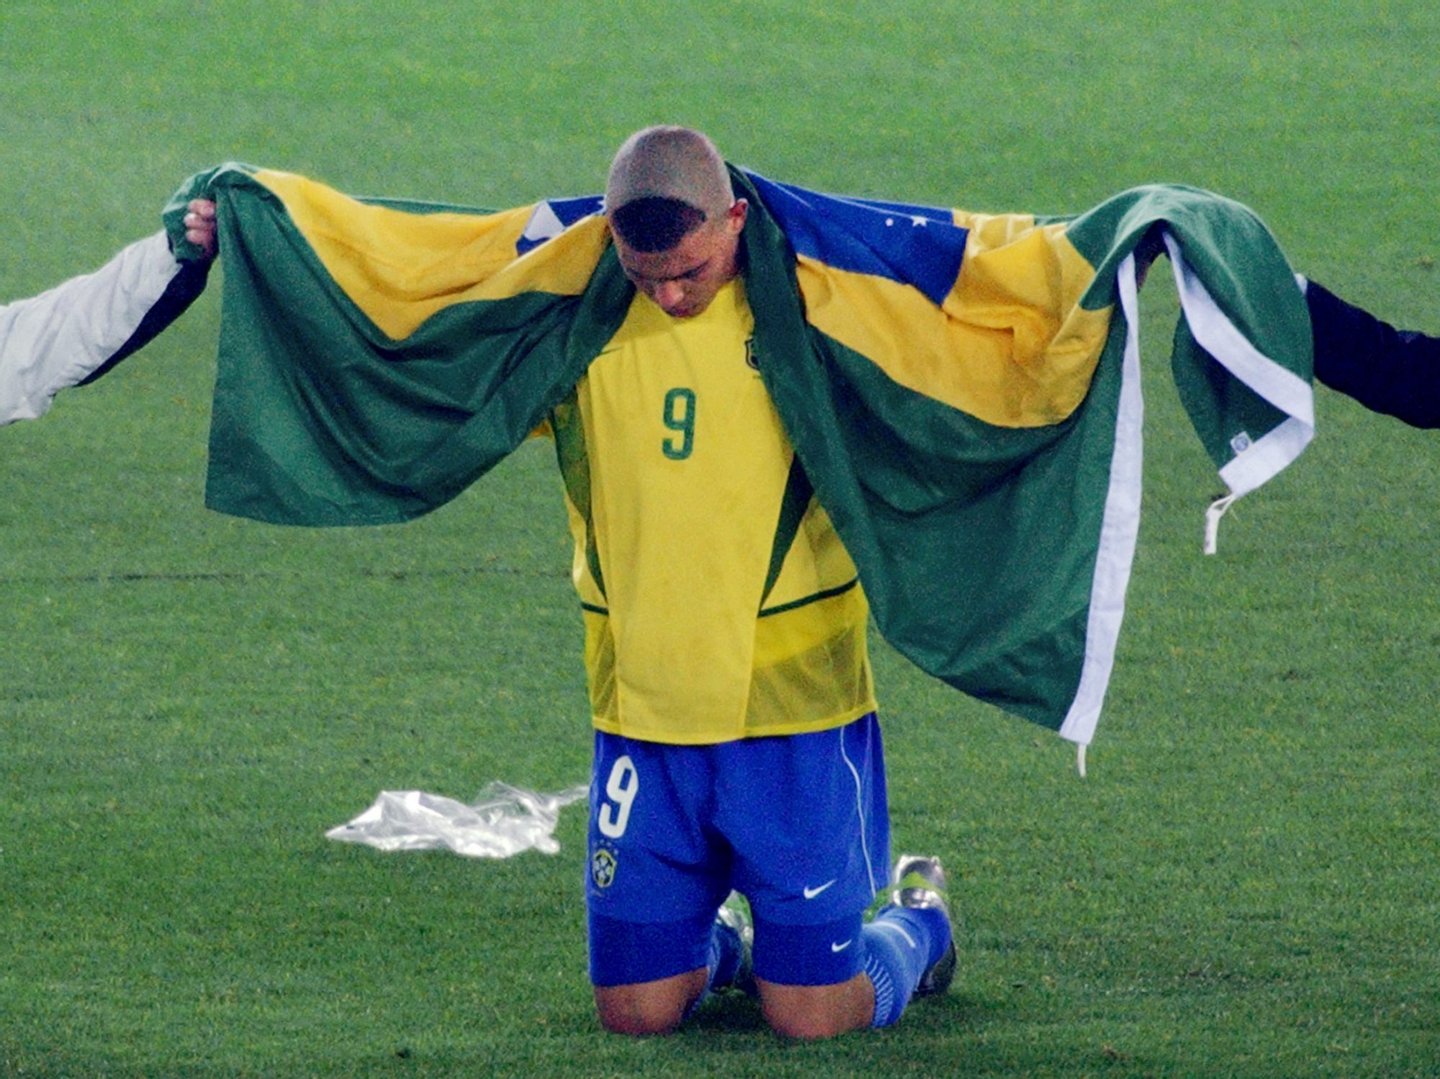 Brazil's forward Ronaldo, wrapped in the national colors, celebrates in silence on the pitch of the International Stadium Yokohama, Japan after Brazil won 2-0 against Germany in match 64 of the 2002 FIFA World Cup Korea Japan final 30 June, 2002. Ronaldo scored the two winning goals, giving Brazil its fifth World Cup title. AFP PHOTO ROBERTO SCHMIDT (Photo credit should read ROBERTO SCHMIDT/AFP/Getty Images)